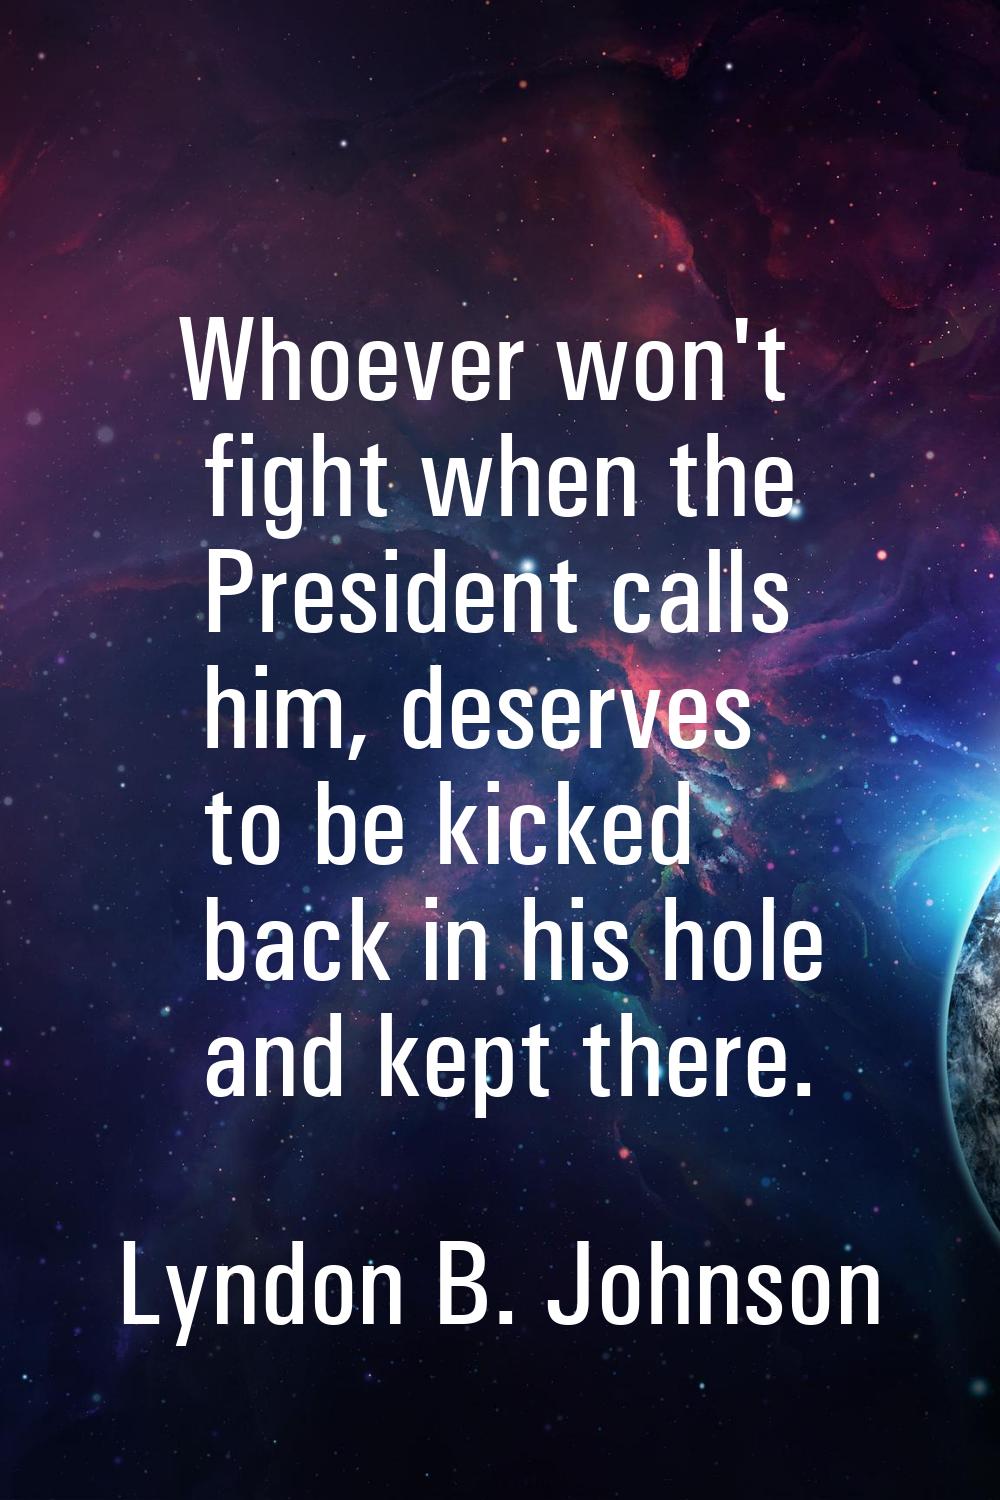 Whoever won't fight when the President calls him, deserves to be kicked back in his hole and kept t